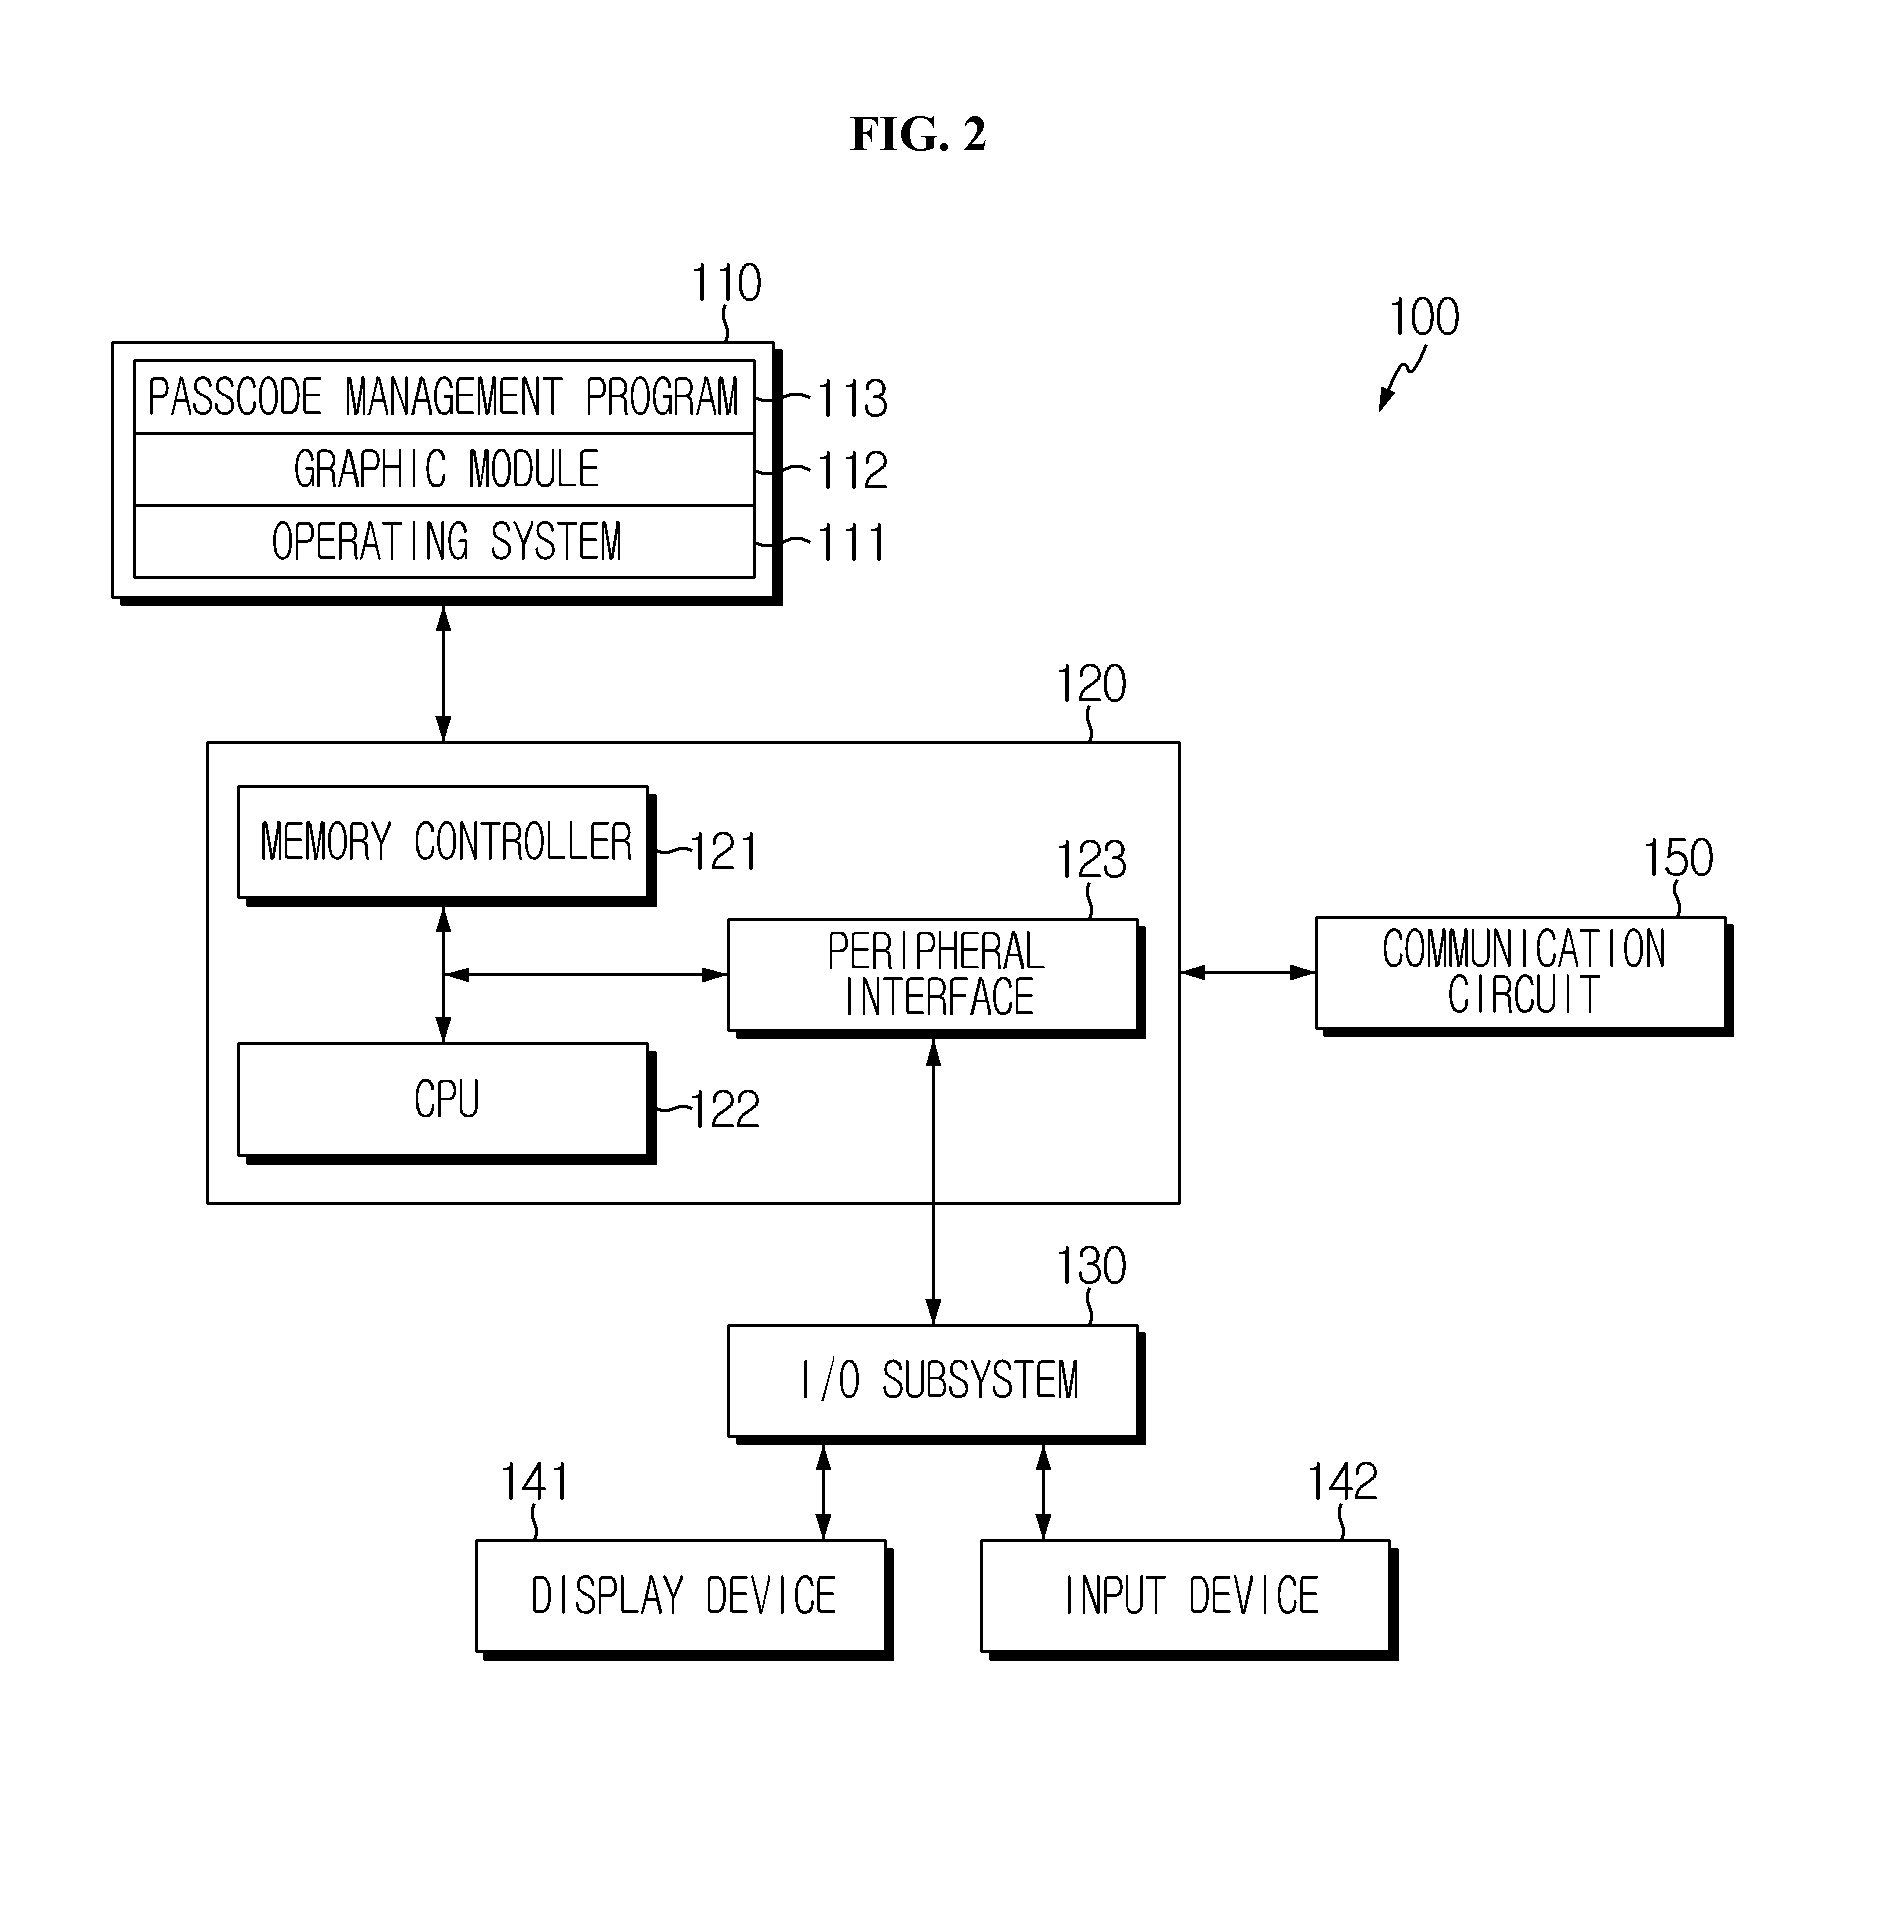 Method and Apparatus for Managing Passcode